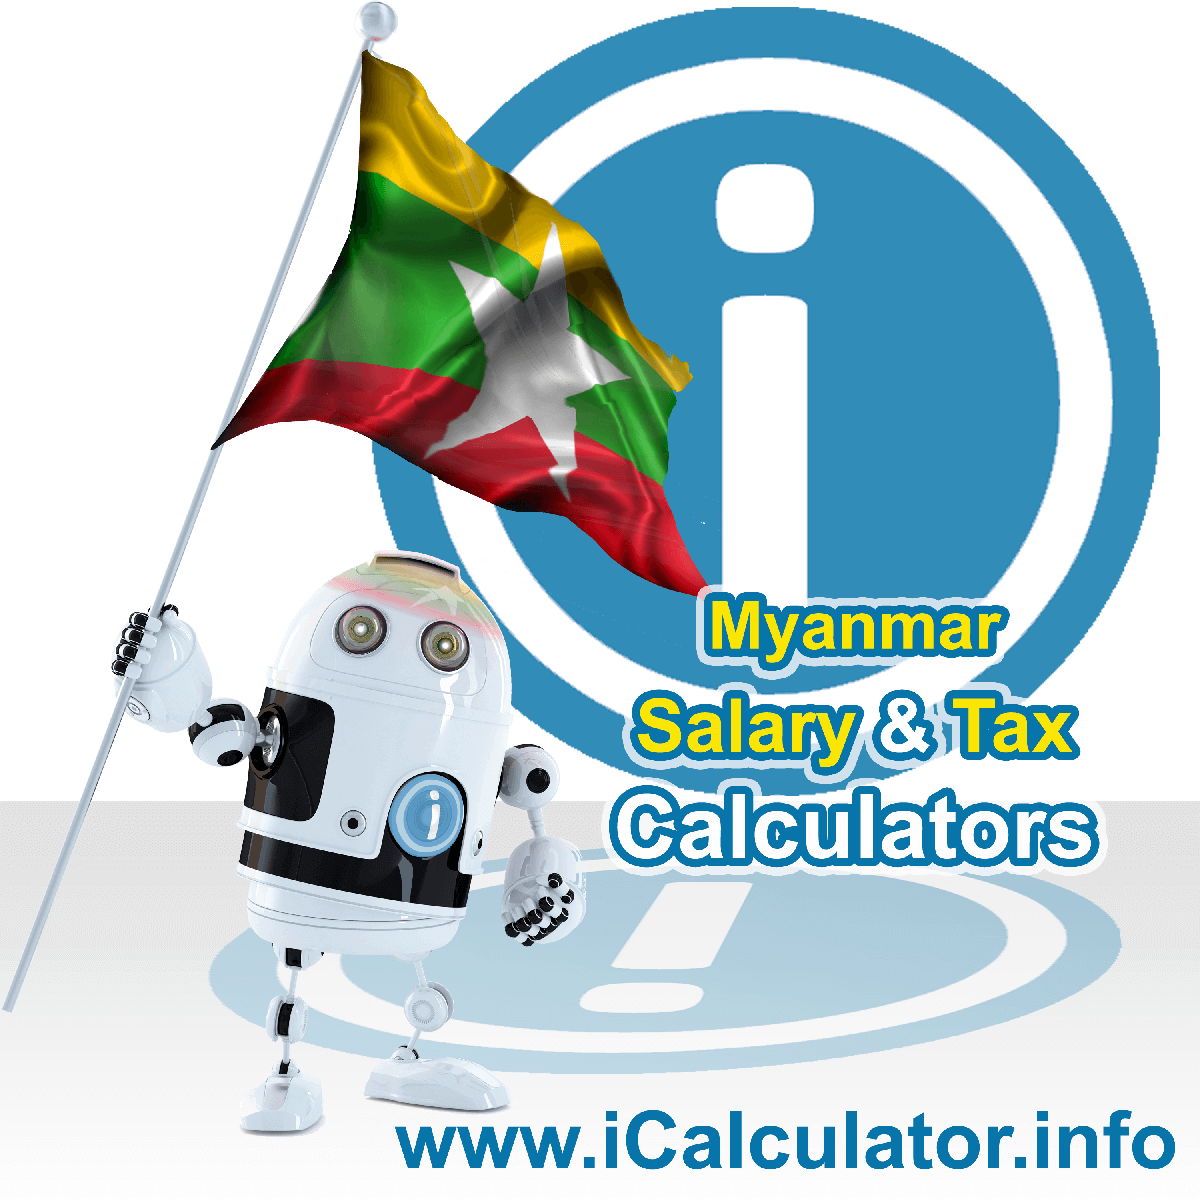 Myanmar Tax Calculator. This image shows the Myanmar flag and information relating to the tax formula for the Myanmar Salary Calculator